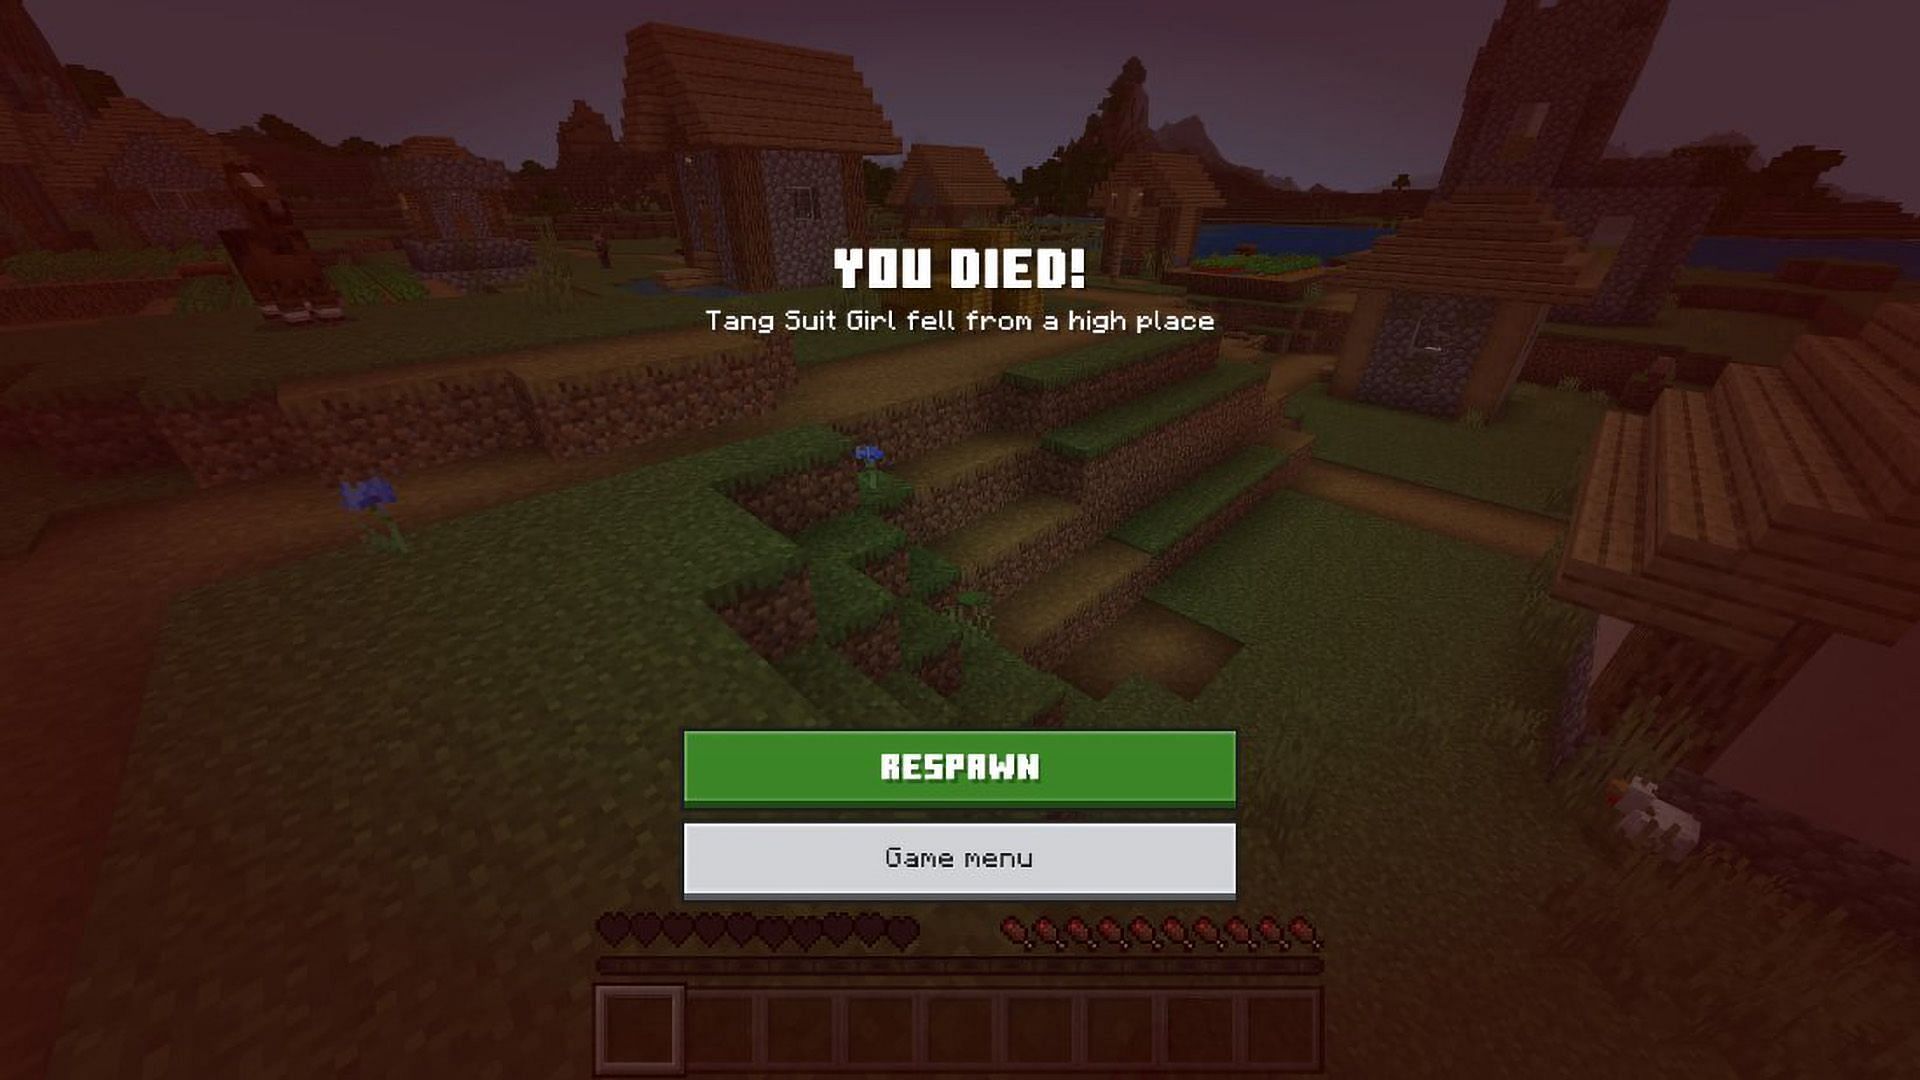 A new death screen has been added (Image via Mojang)